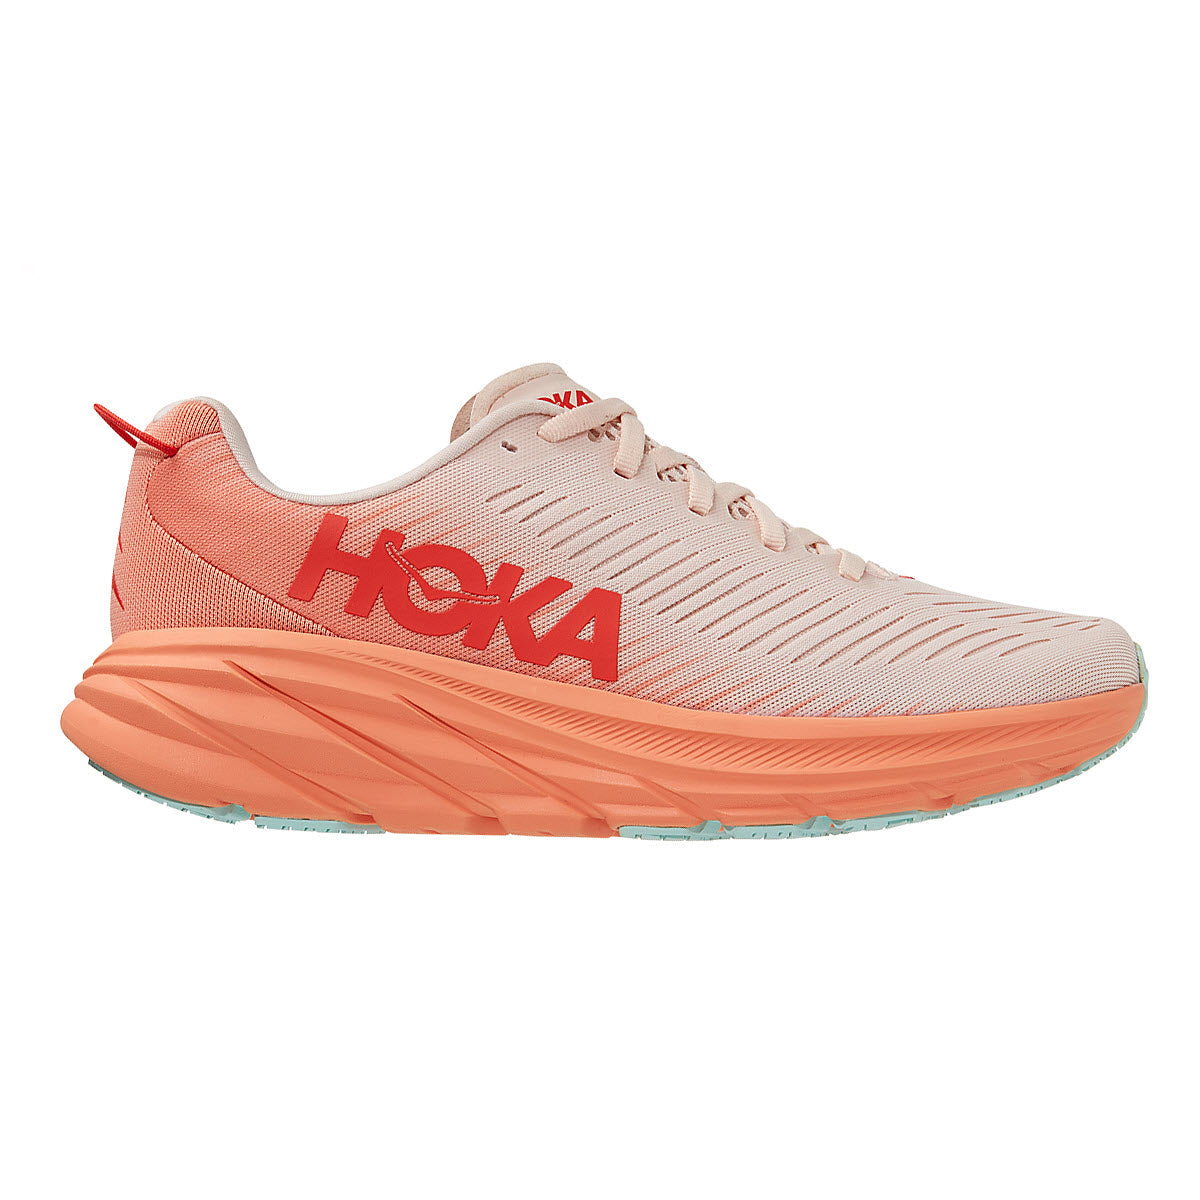 A side view of a coral-colored Hoka Rincon running shoe with light midsole foam. 
would become:
A side view of a coral-colored HOKA ONE ONE RINCON 3 SILVER PEONY/CANTALOUPE - WOMENS running shoe with light midsole foam.